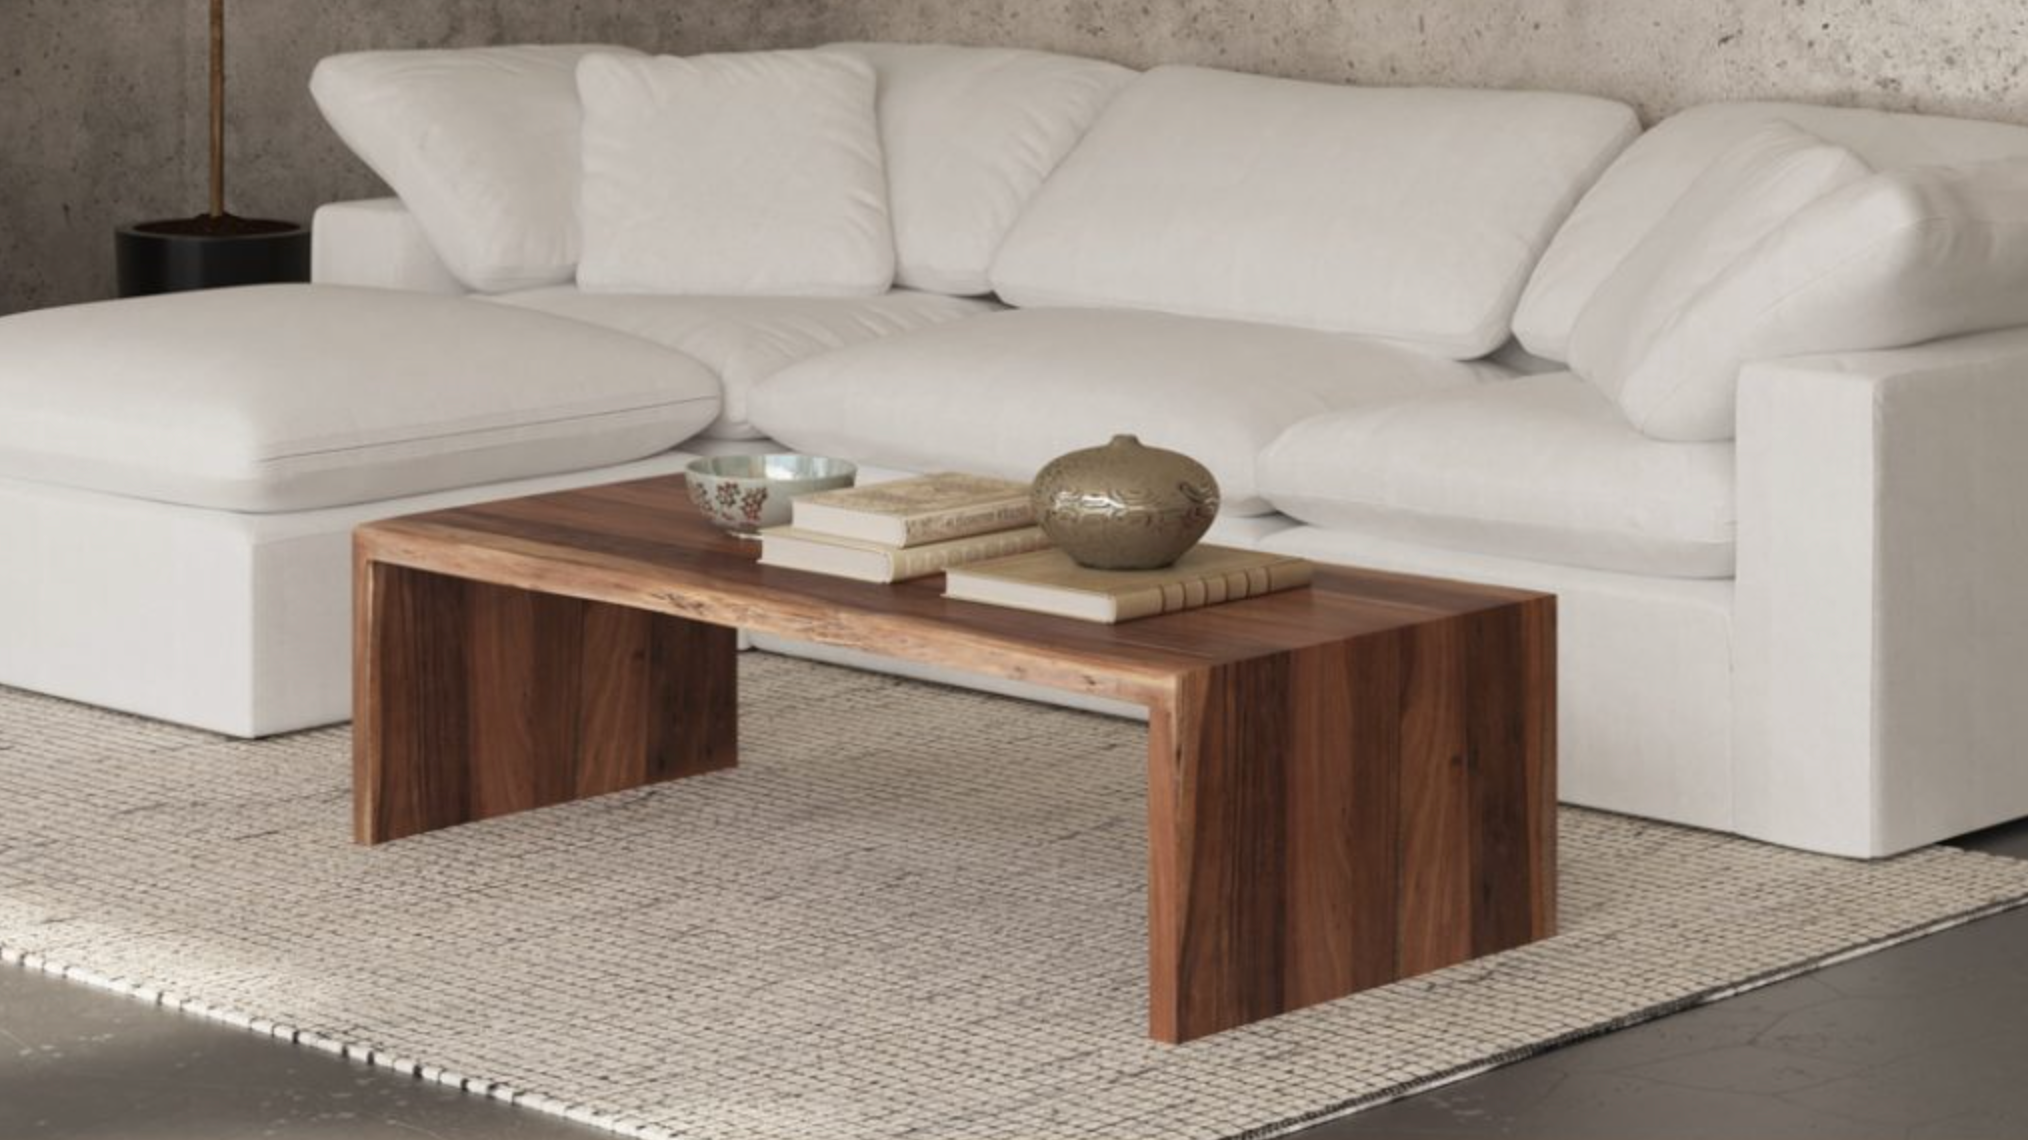 WHISTLER WATERFALL LIVE EDGE TABLES